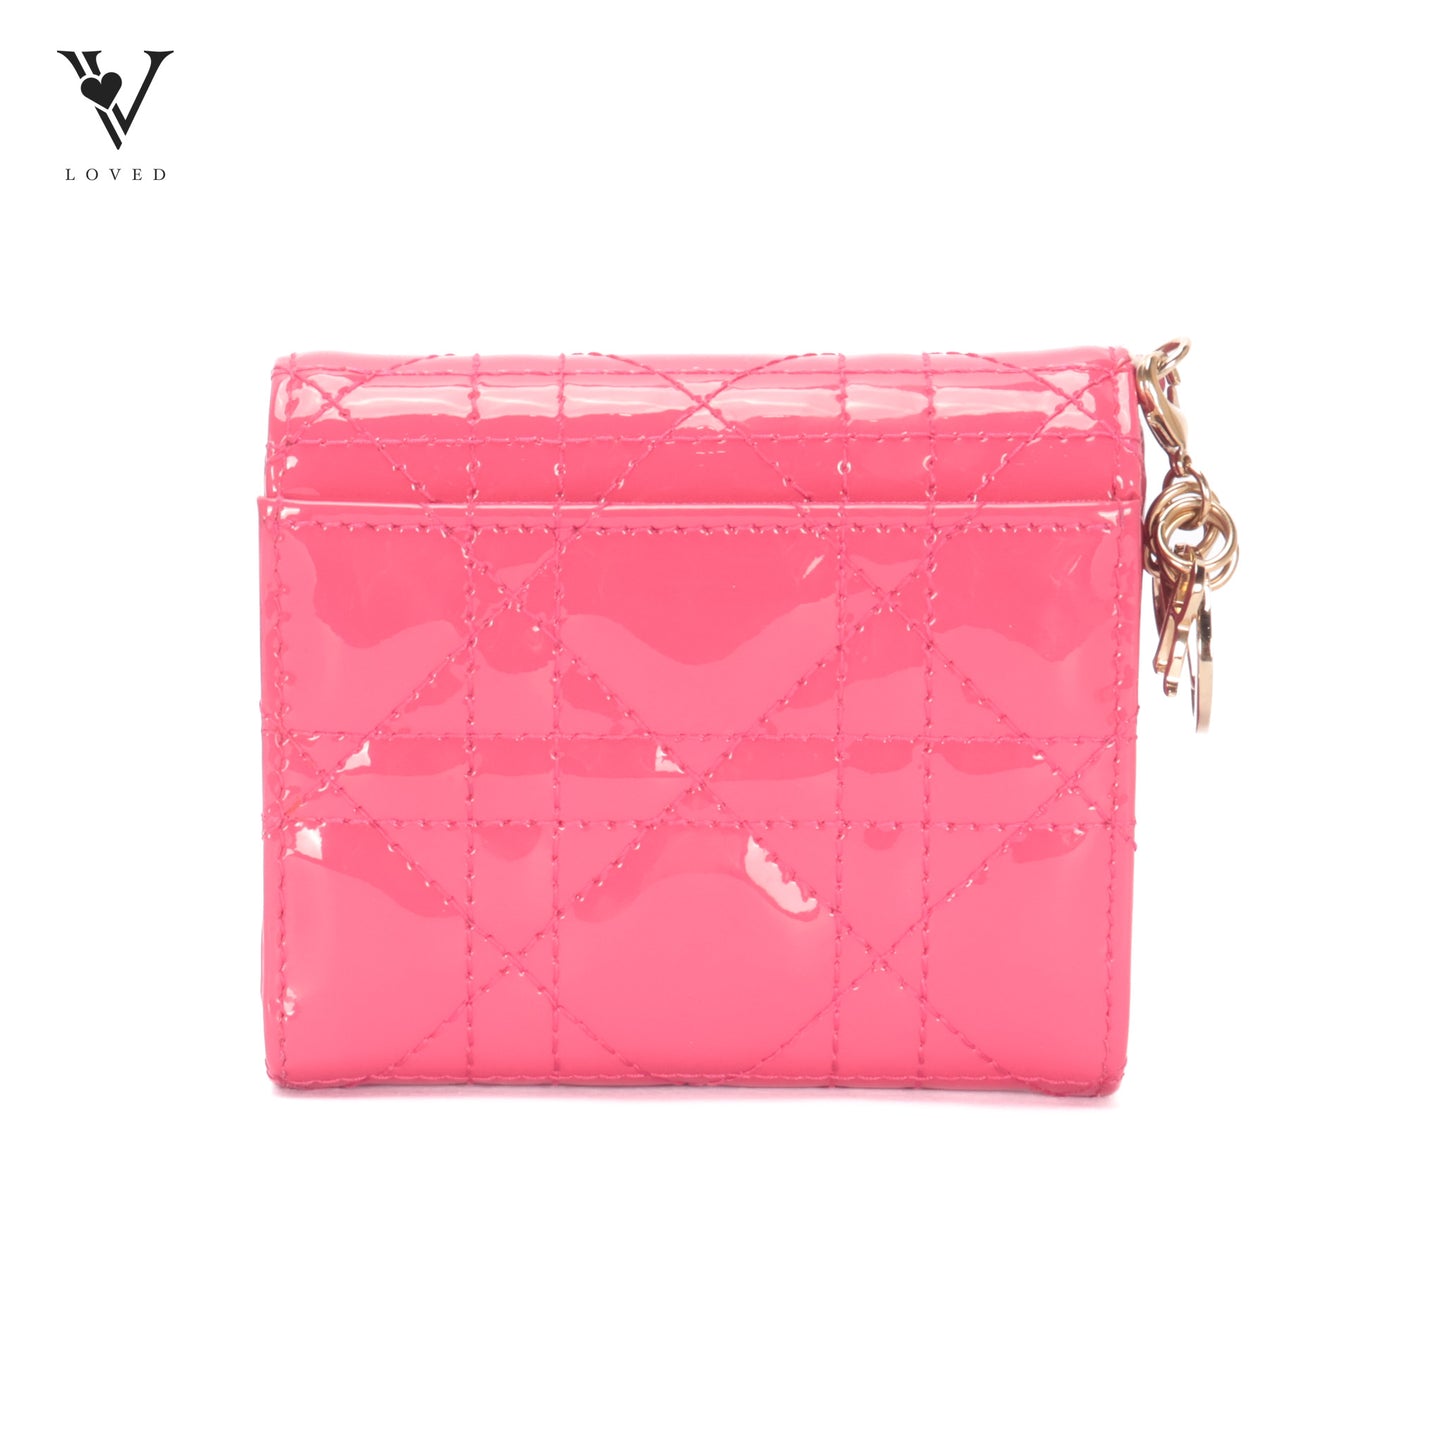 Lady Dior Lotus Wallet in Bright Pink Patent Cannage Calfskin